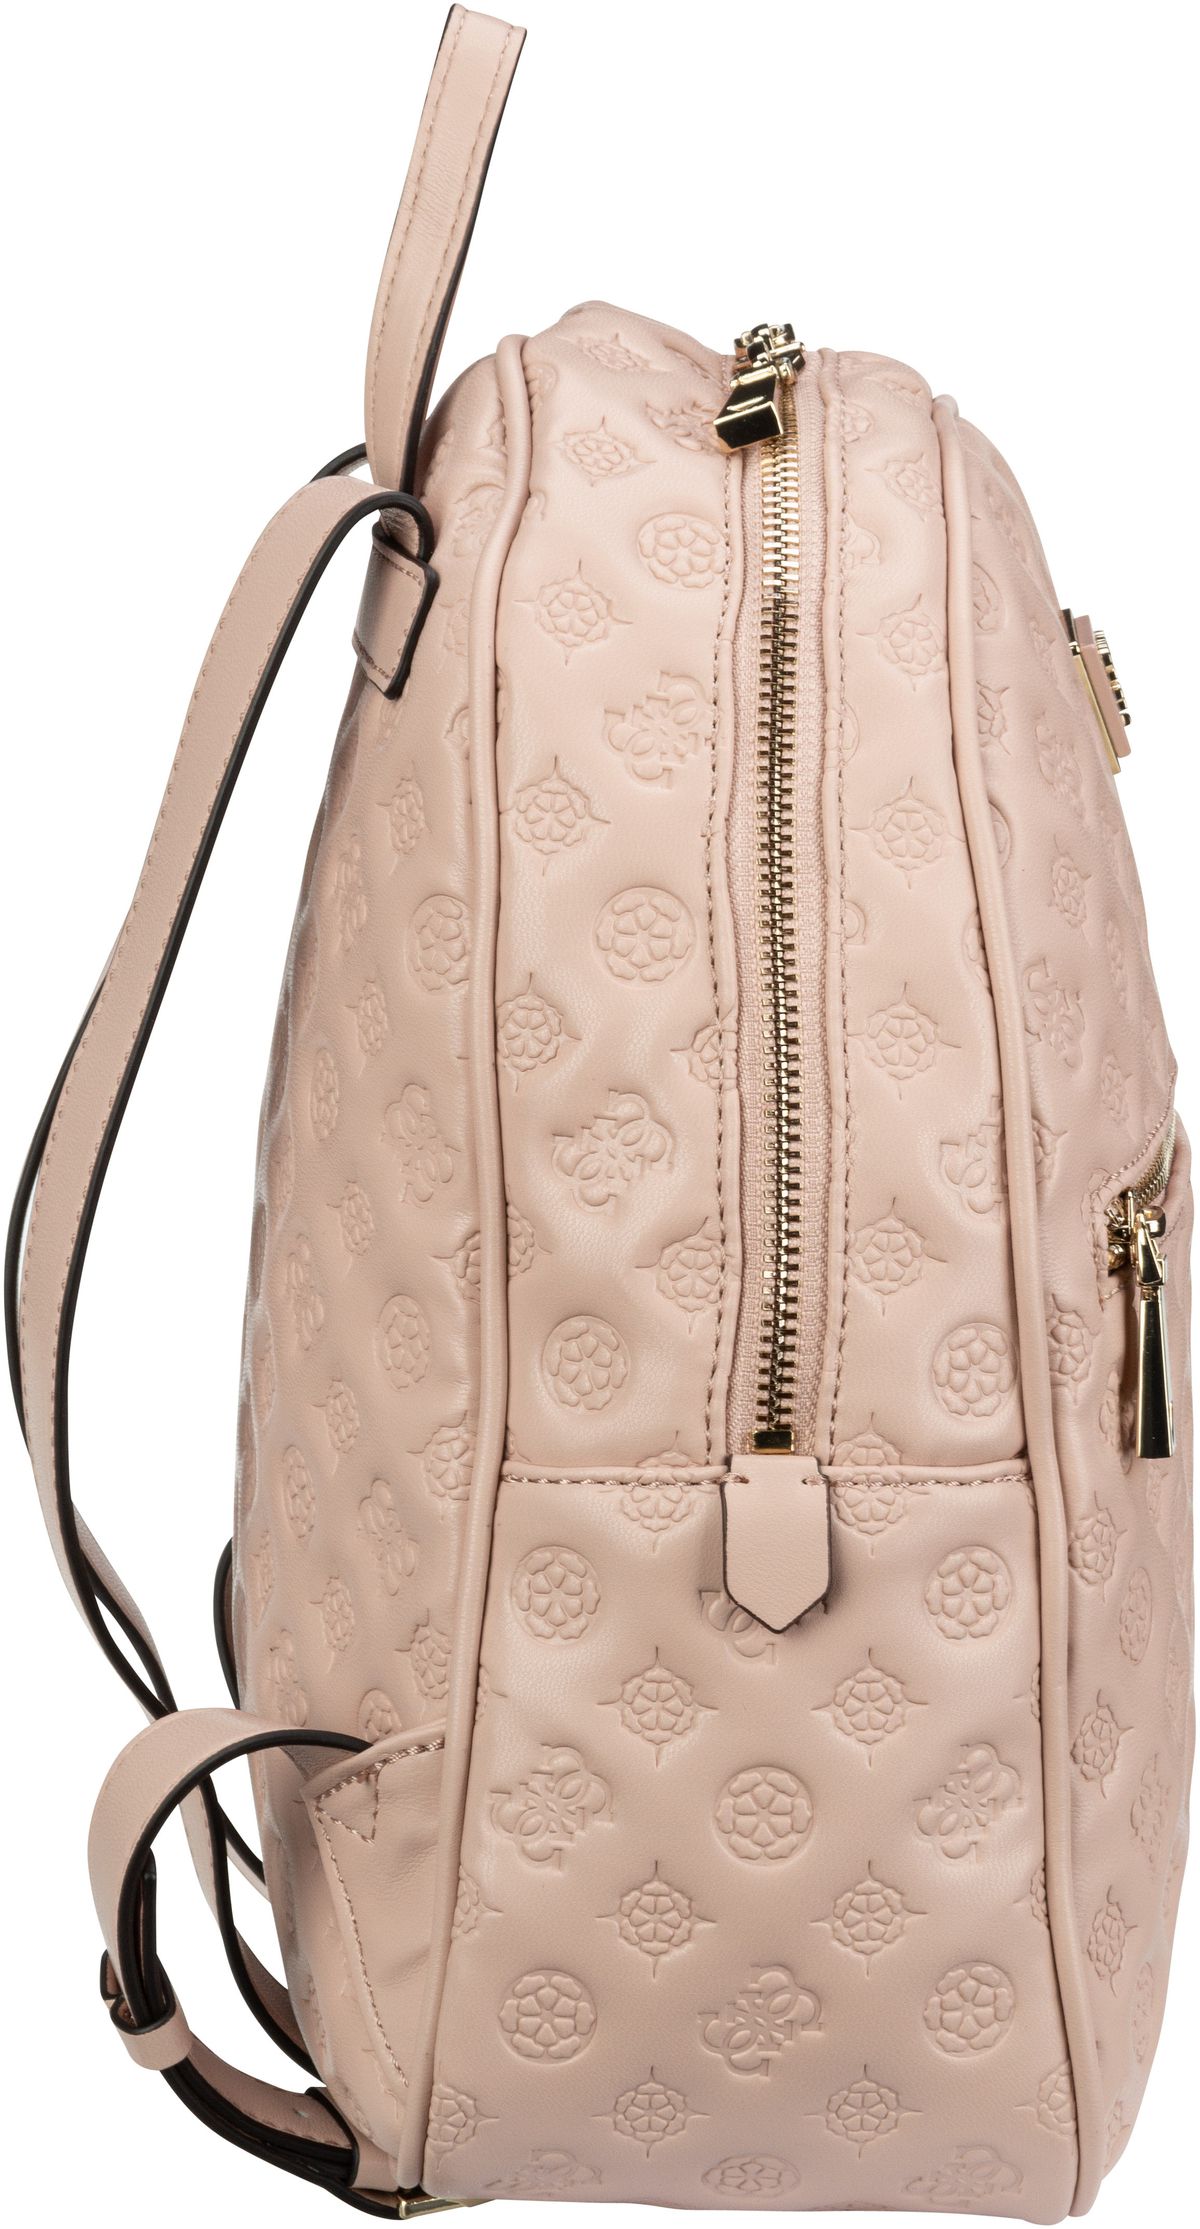 Guess Vikky Backpack LF - Pale Rose